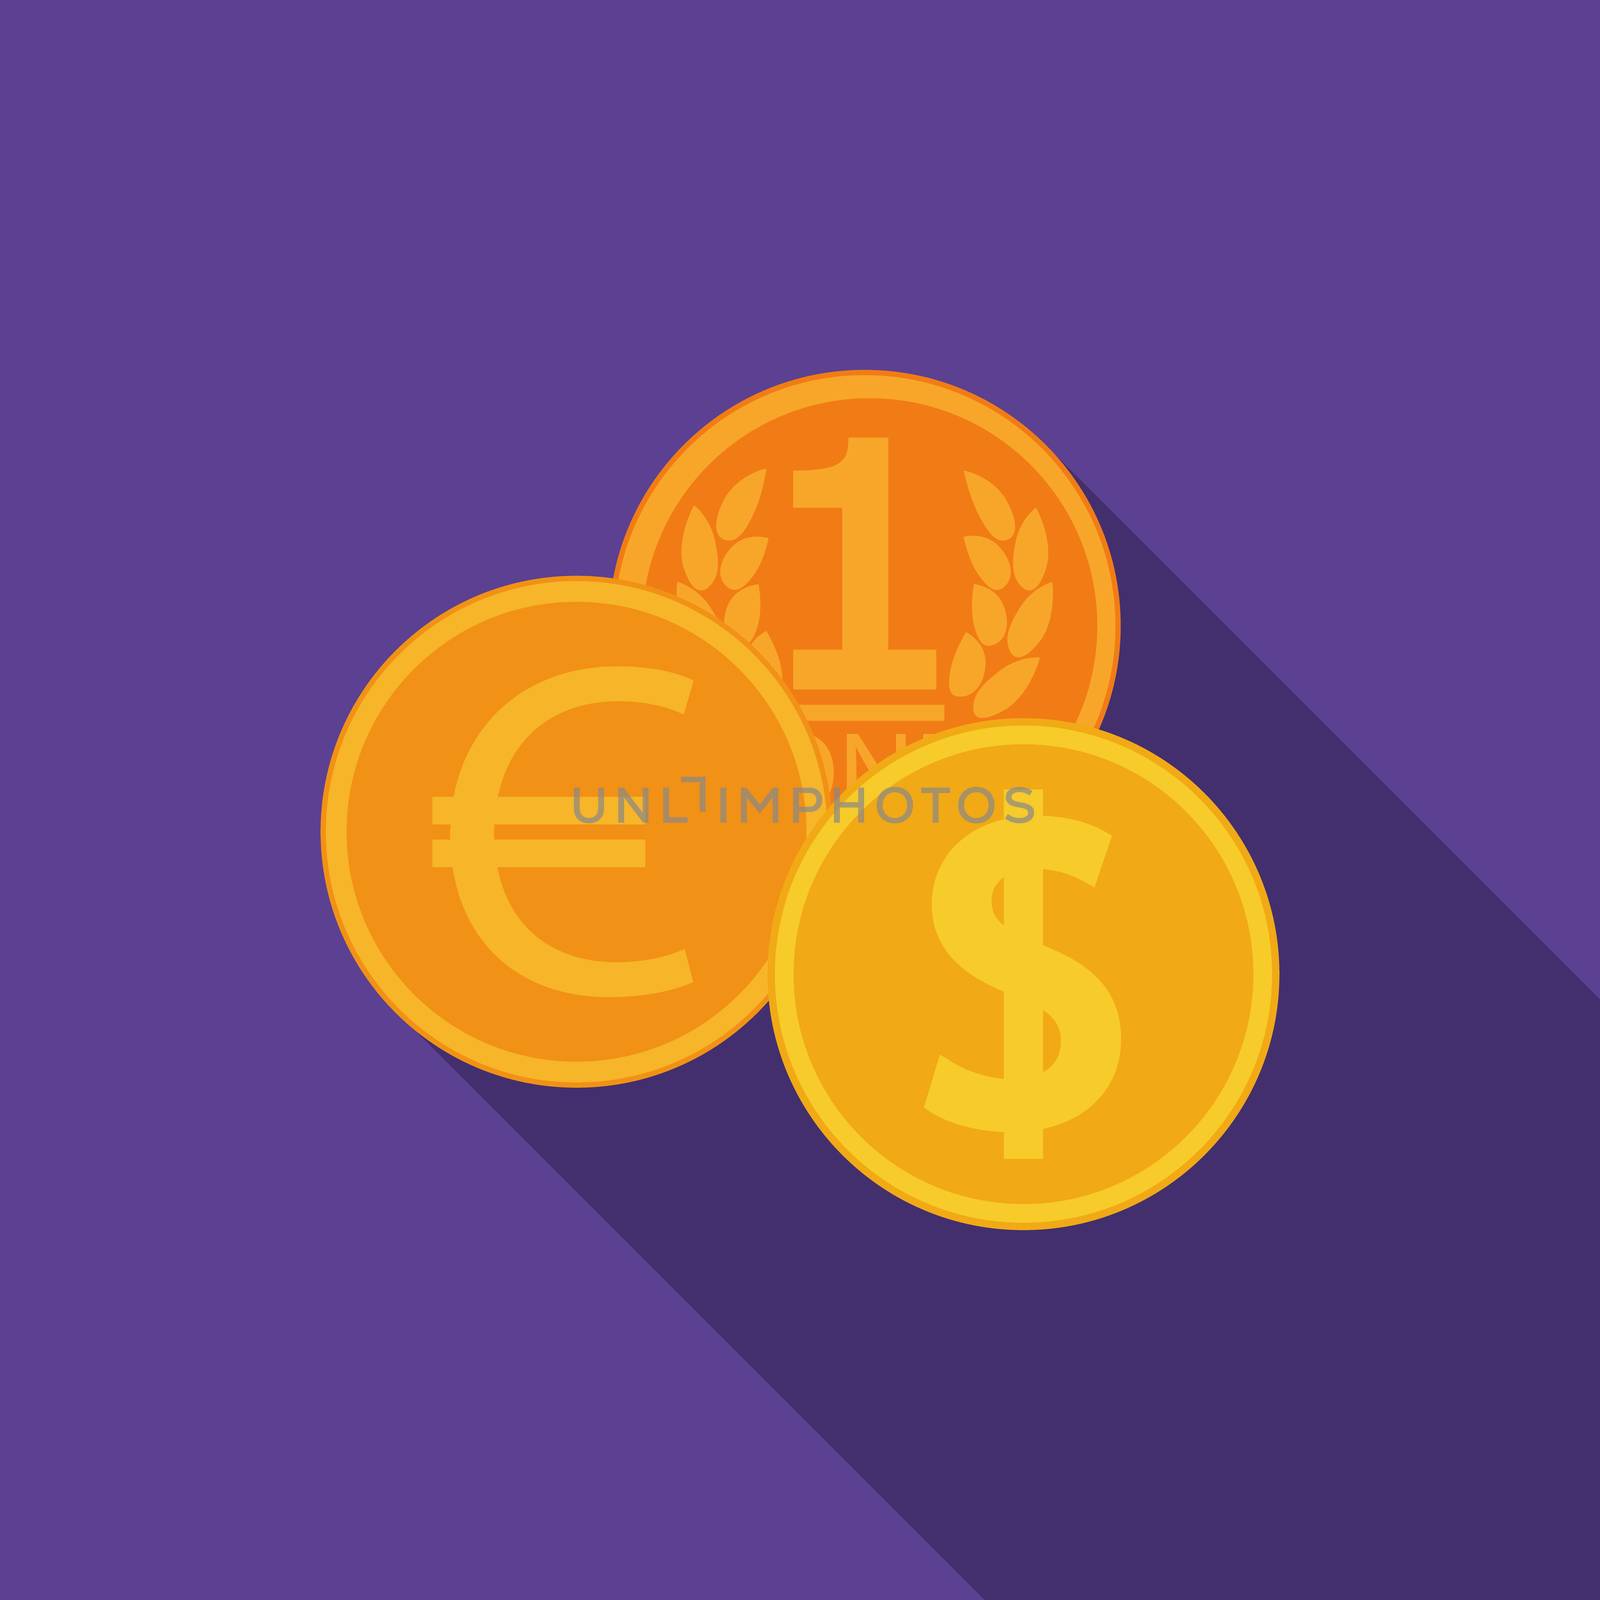 Flat design vector coins icon with long shadow.